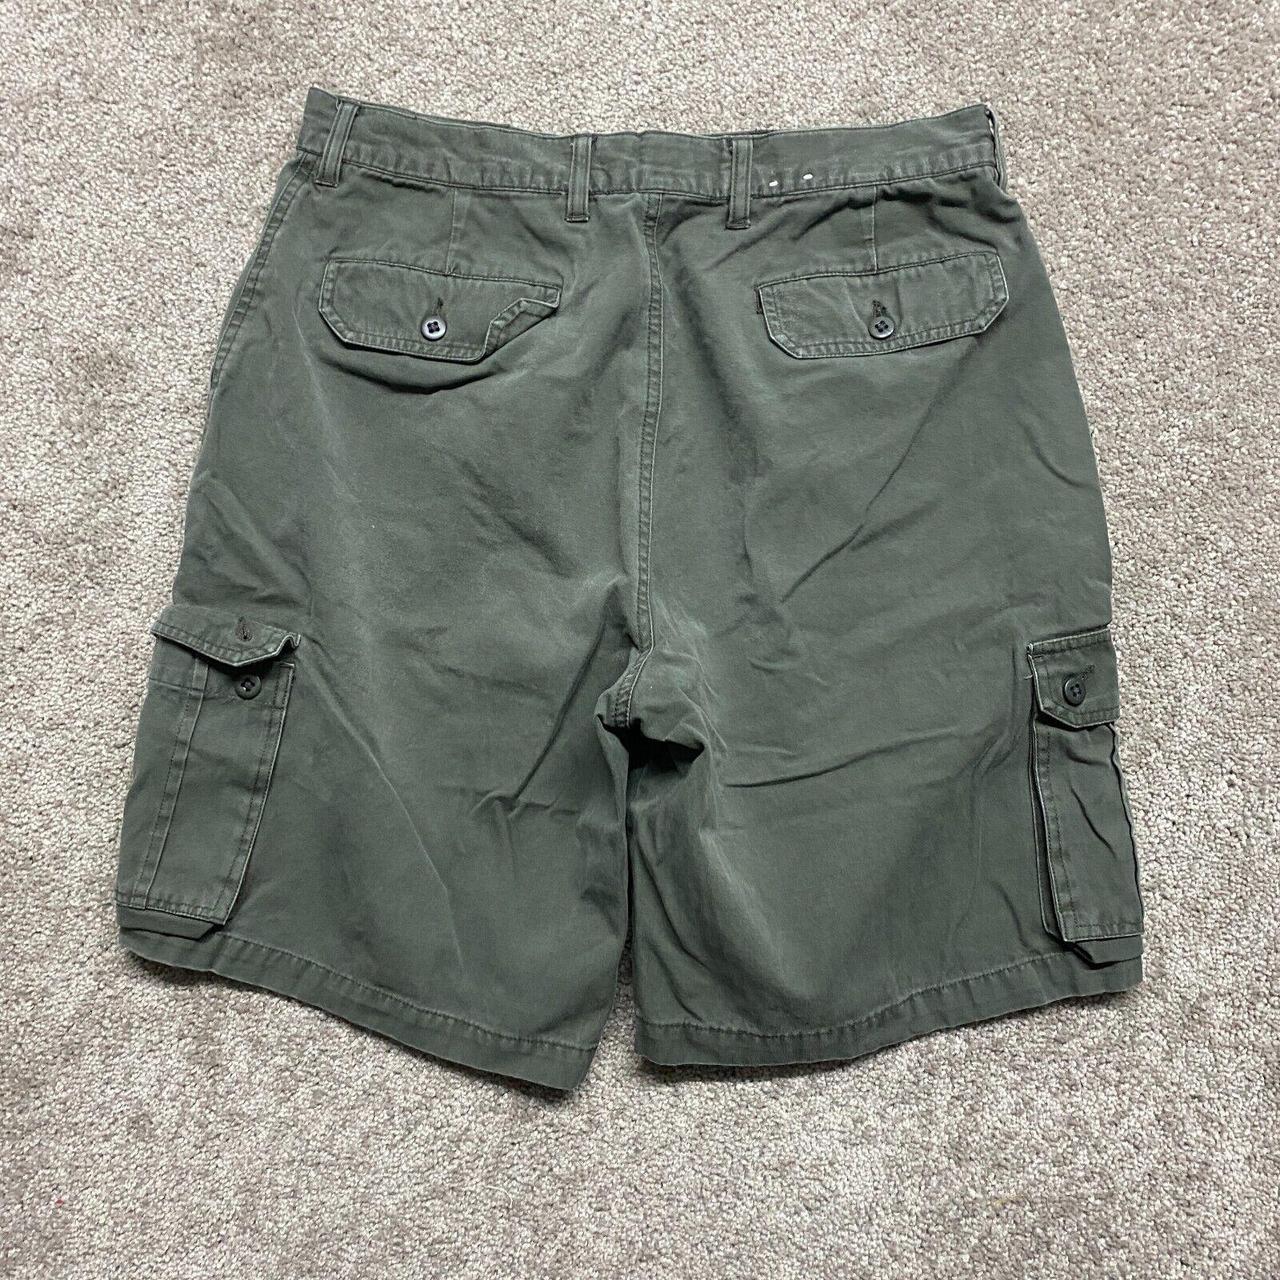 Utility Men's Brown and Green Shorts (3)